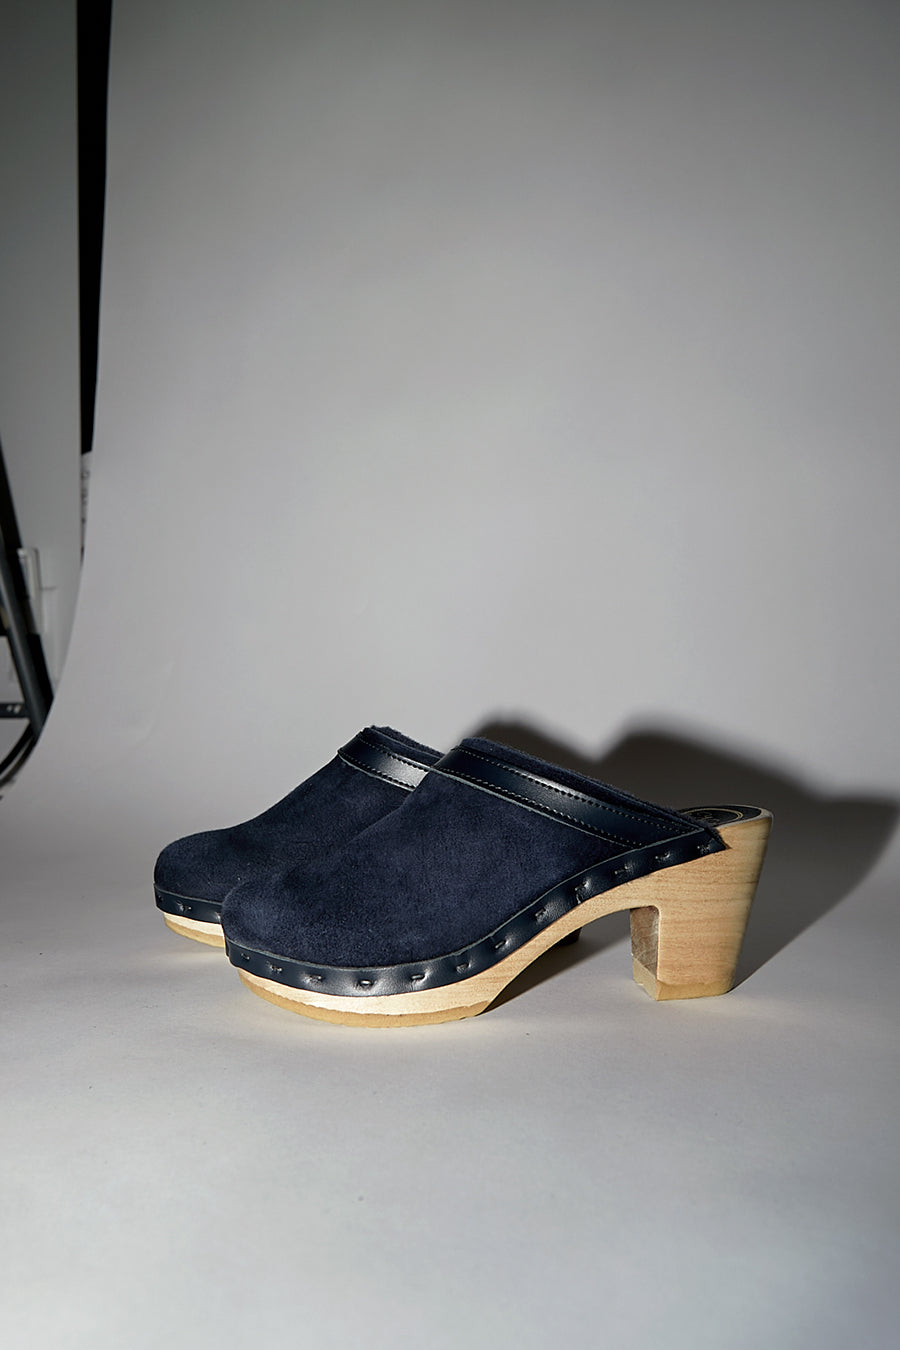 No.6 Dakota Shearling Clog on High Heel in Navy Suede and Night